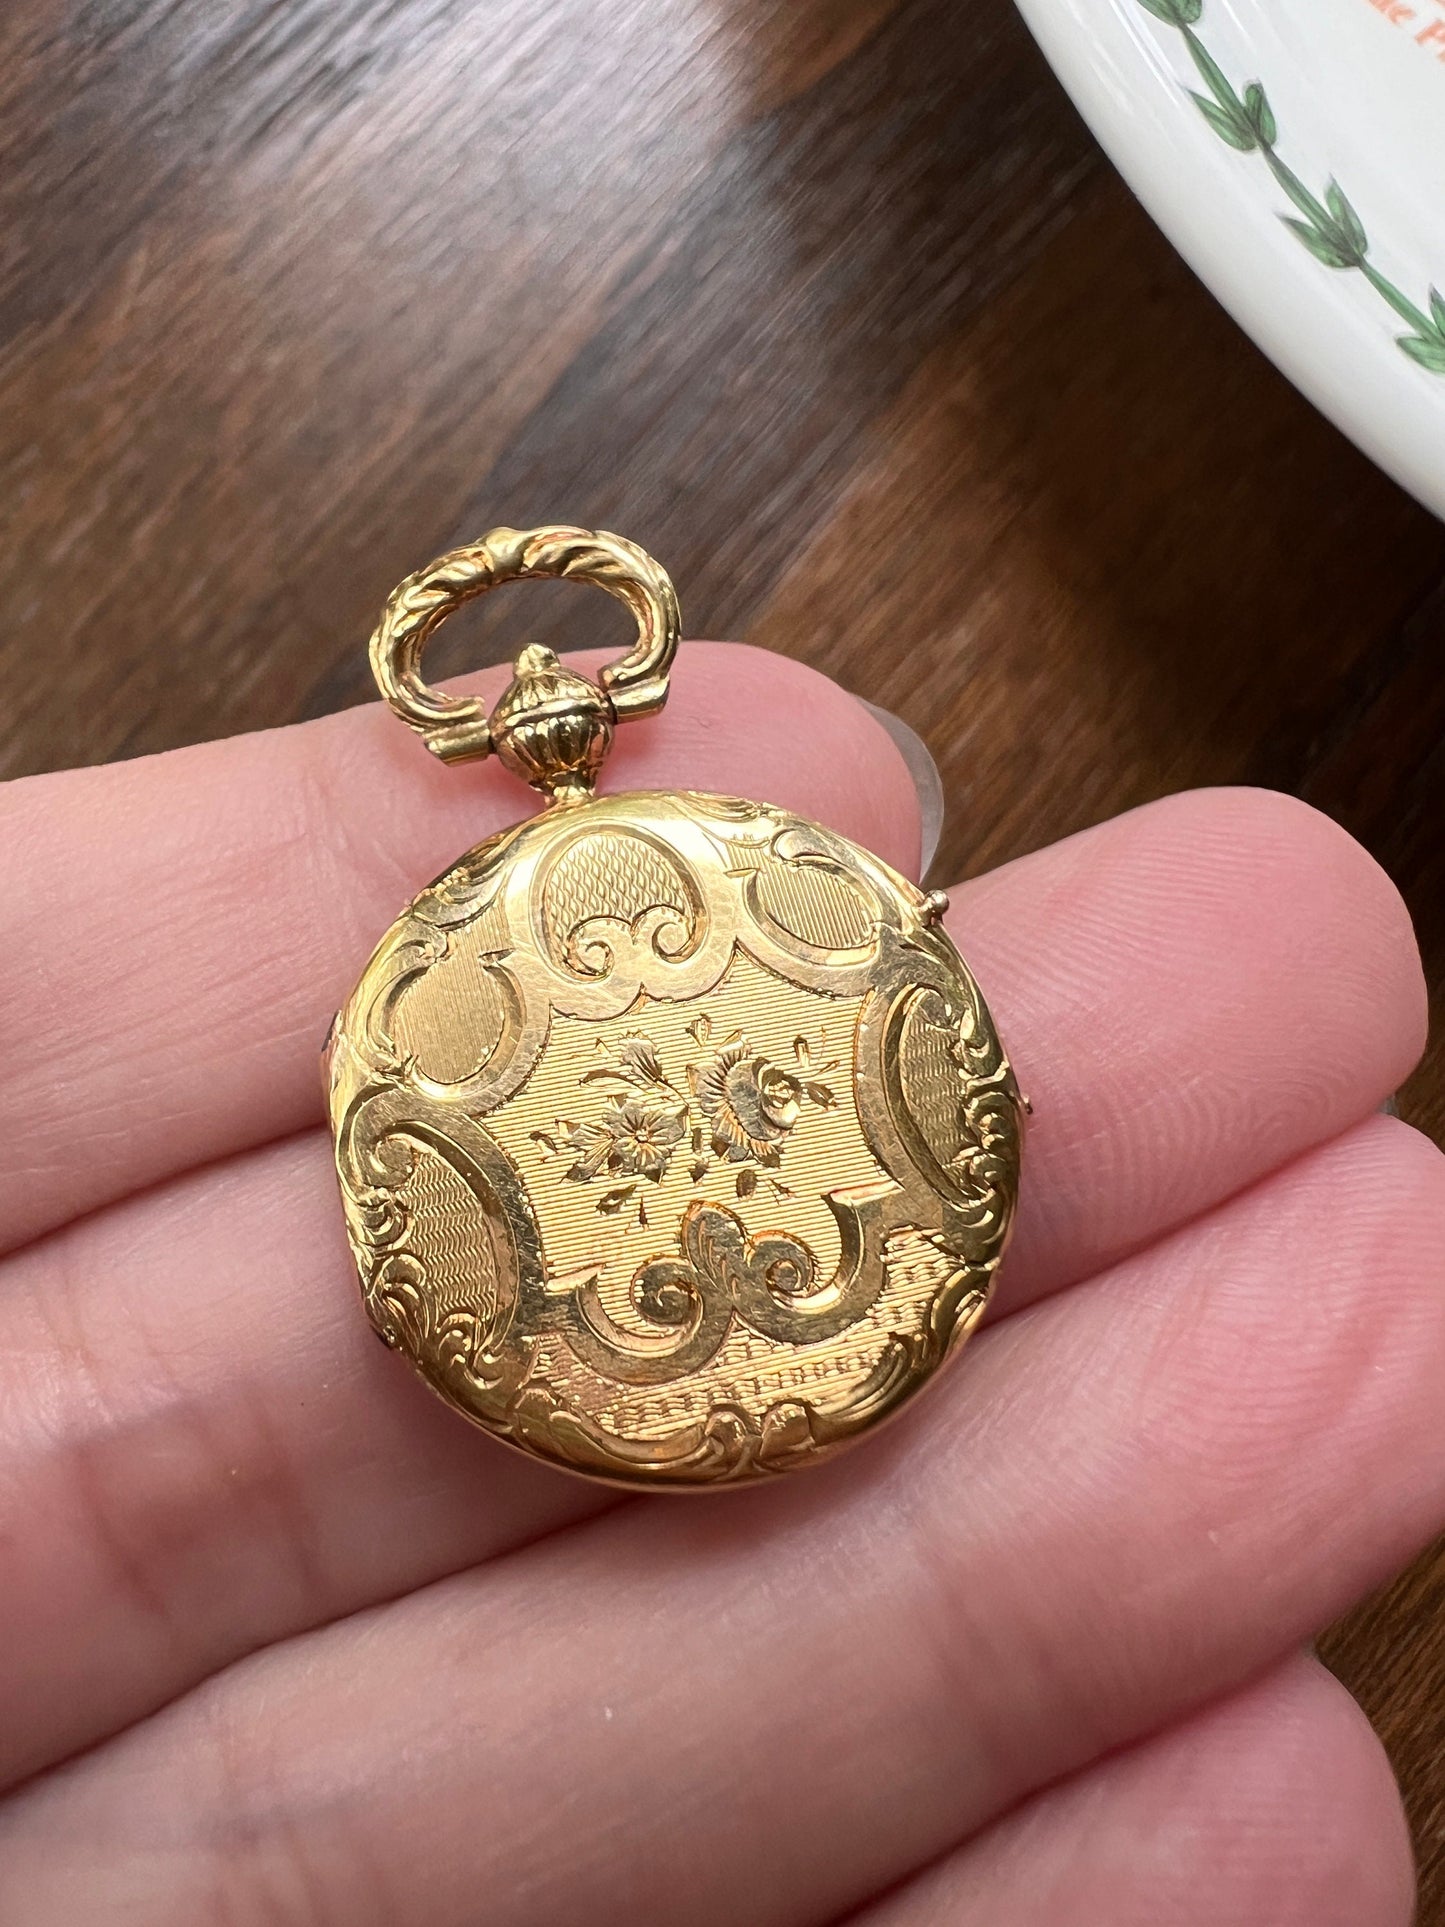 LOCKET Reversible FLORAL Engraved Antique Pendant Victorian 18k Gold Solid French Belle Epoque Necklace Romantic Gift Floral Love Double Pic